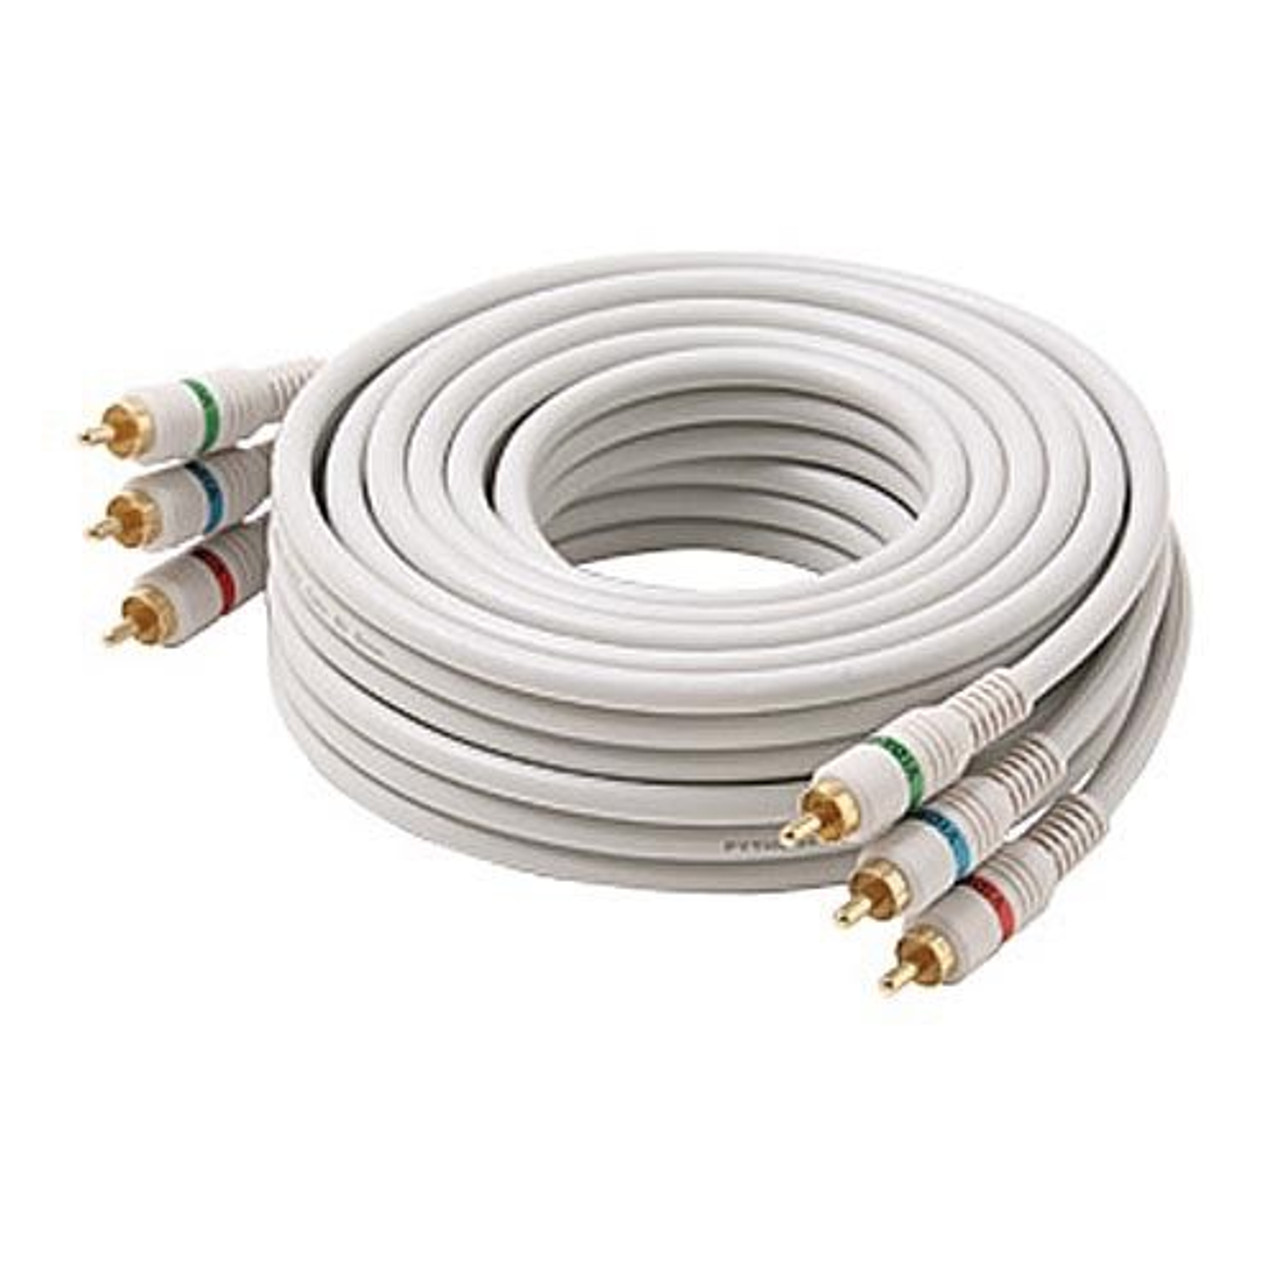 Steren 254 525iv 25 Ft Rca Video Cable Component Ivory 3 Rca Male To 3 Rca Male Double Shielding Co 5778